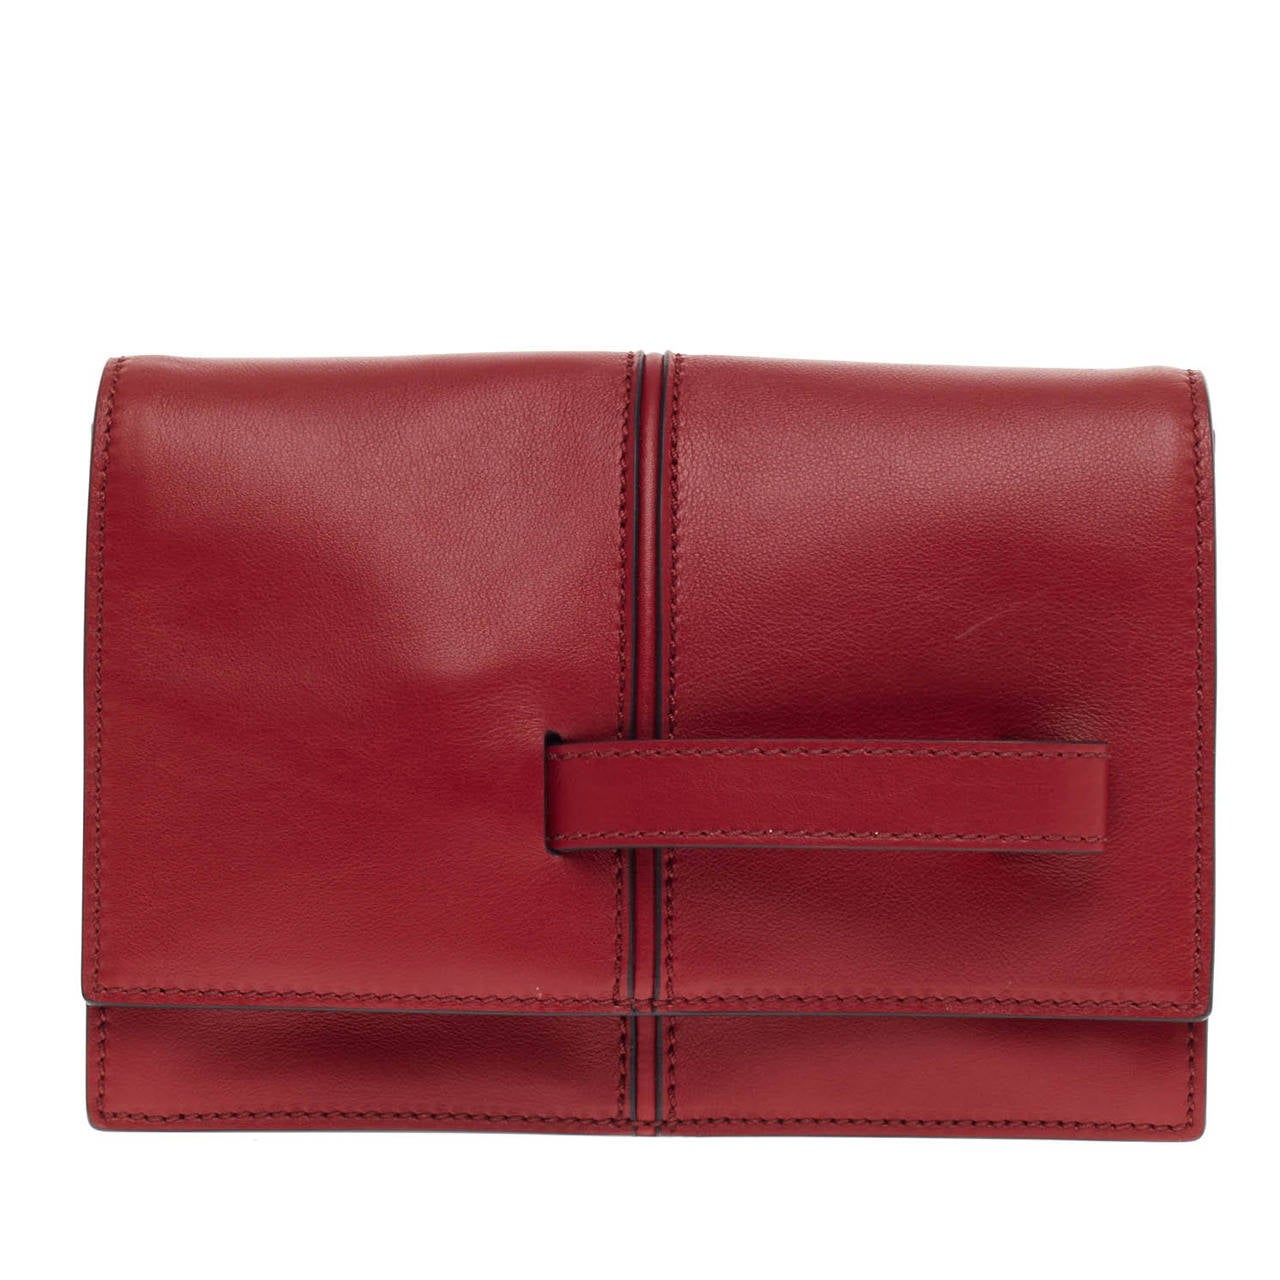 Valentino My Own Code Leather Clutch